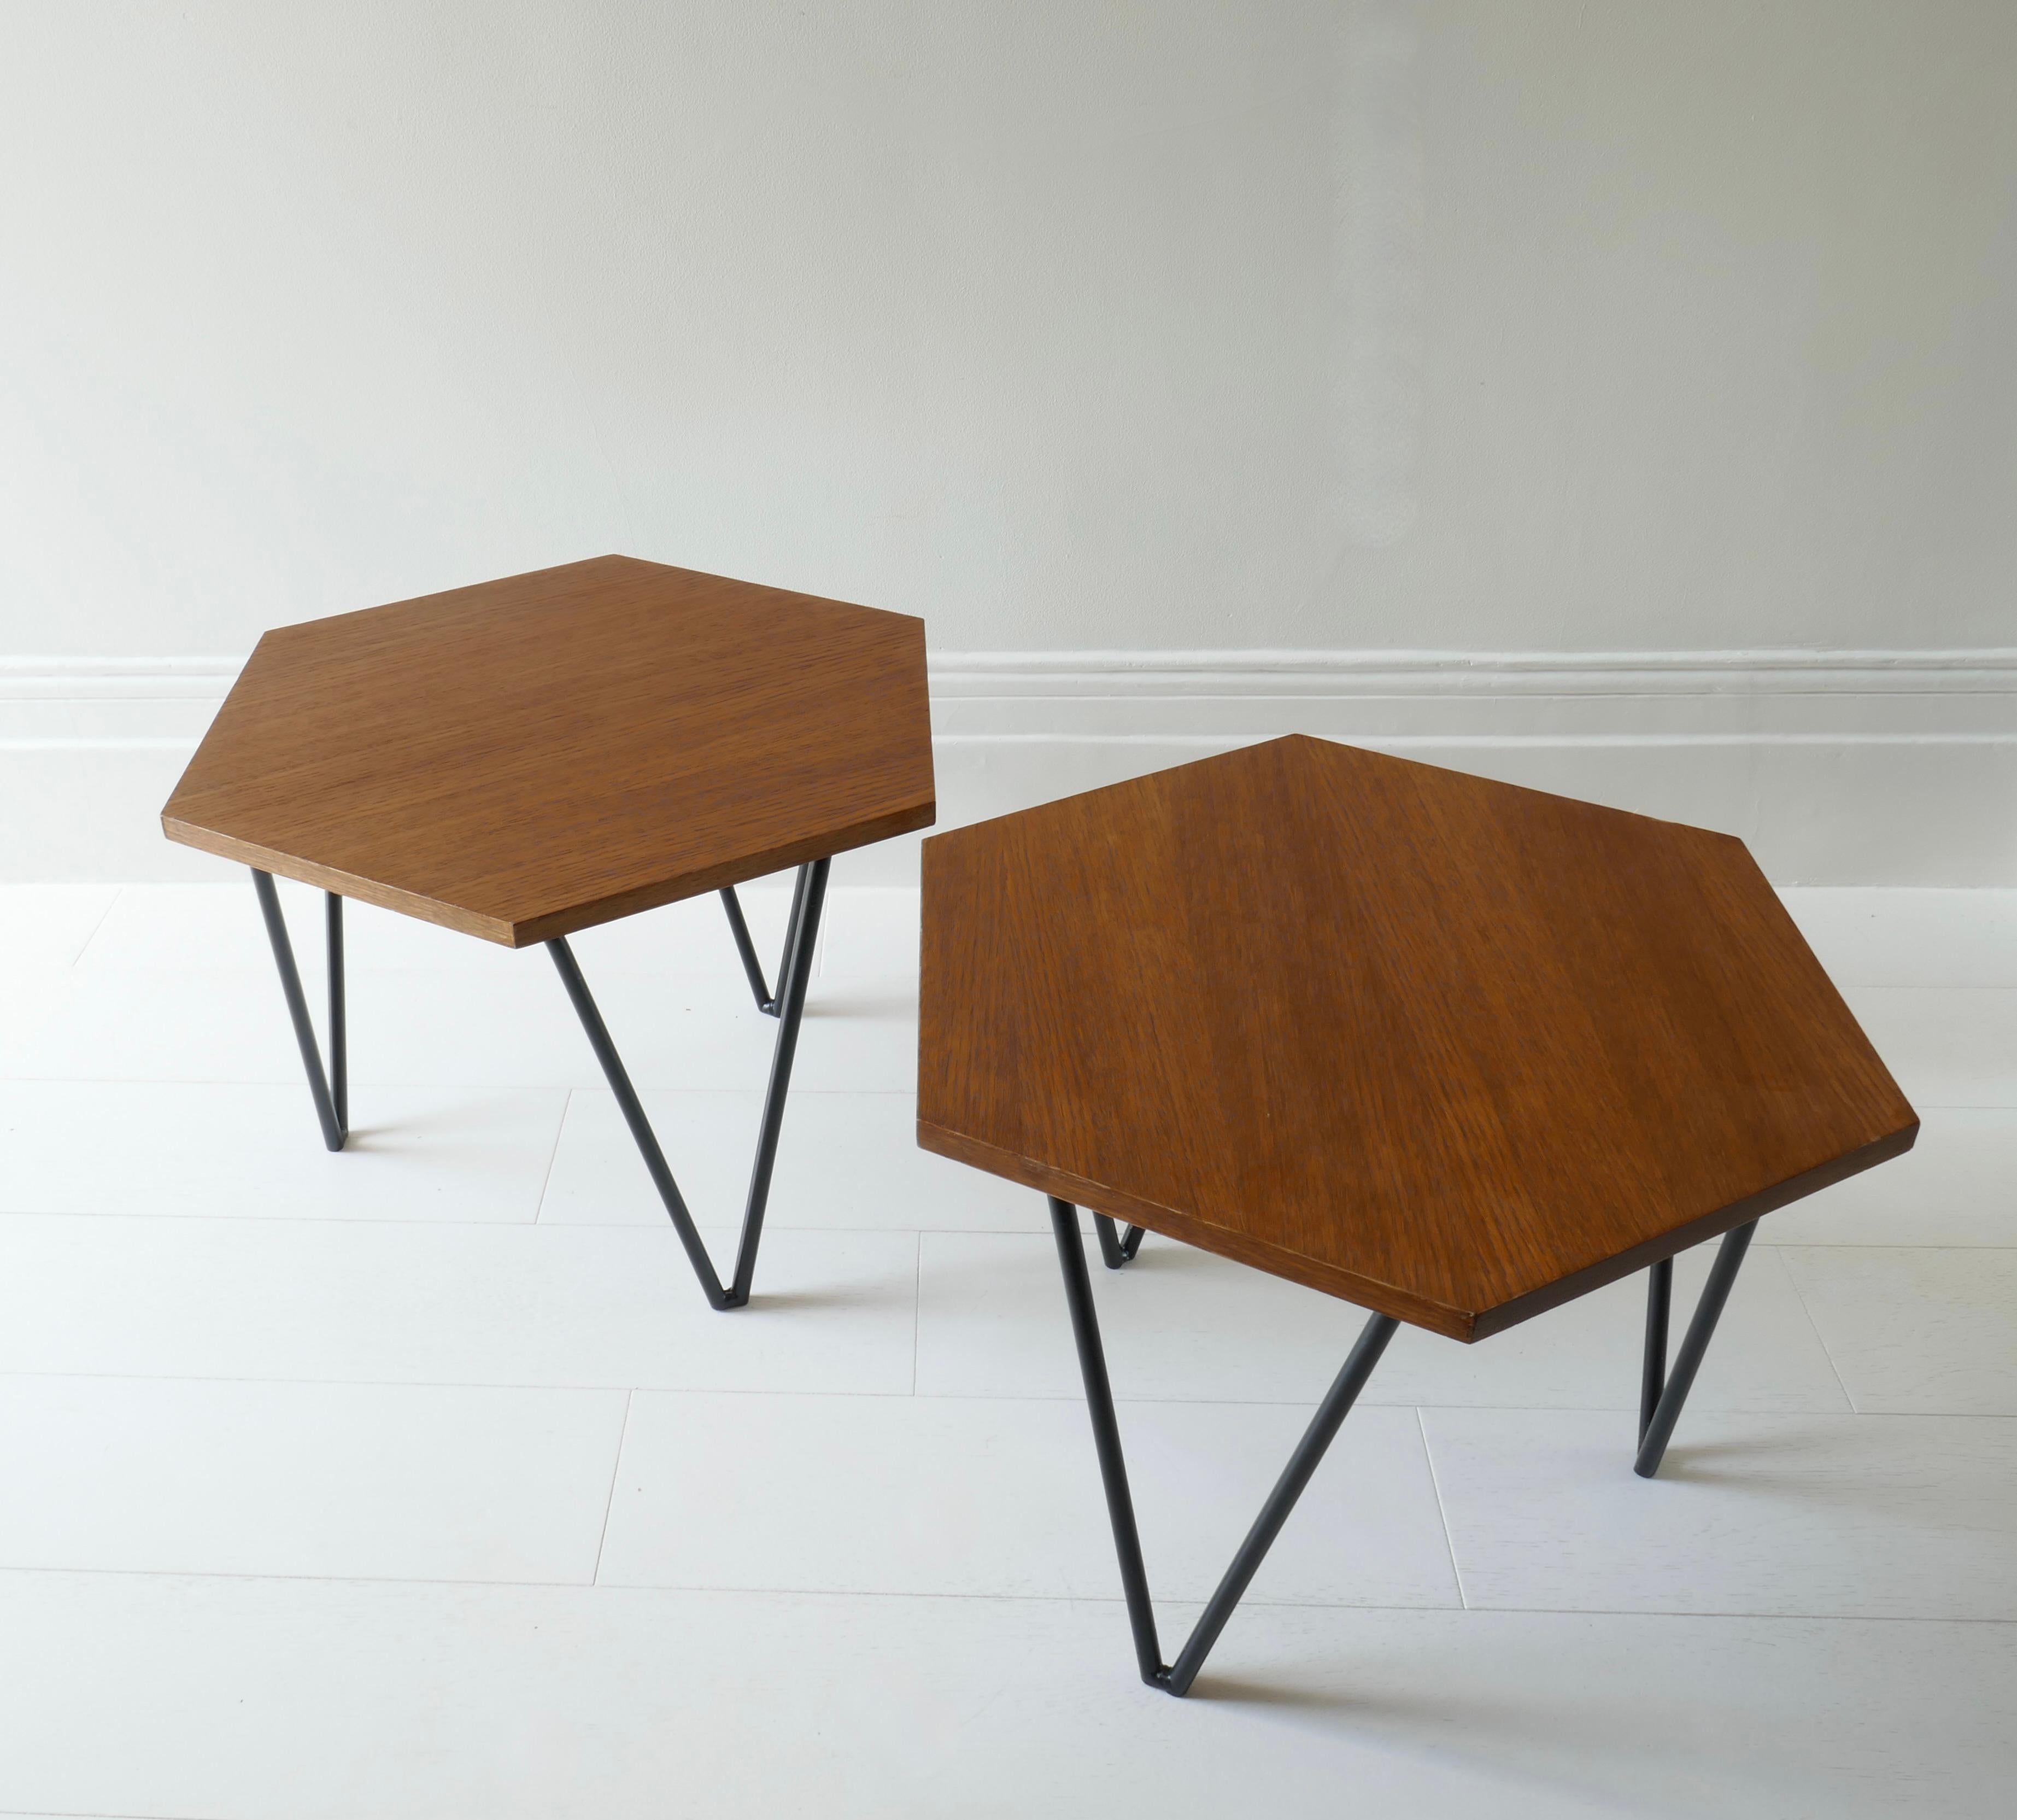 Set of 2 Hexagonal Gio Ponti Low Tables by Isa Bergamo, Italy, 1950s For Sale 2